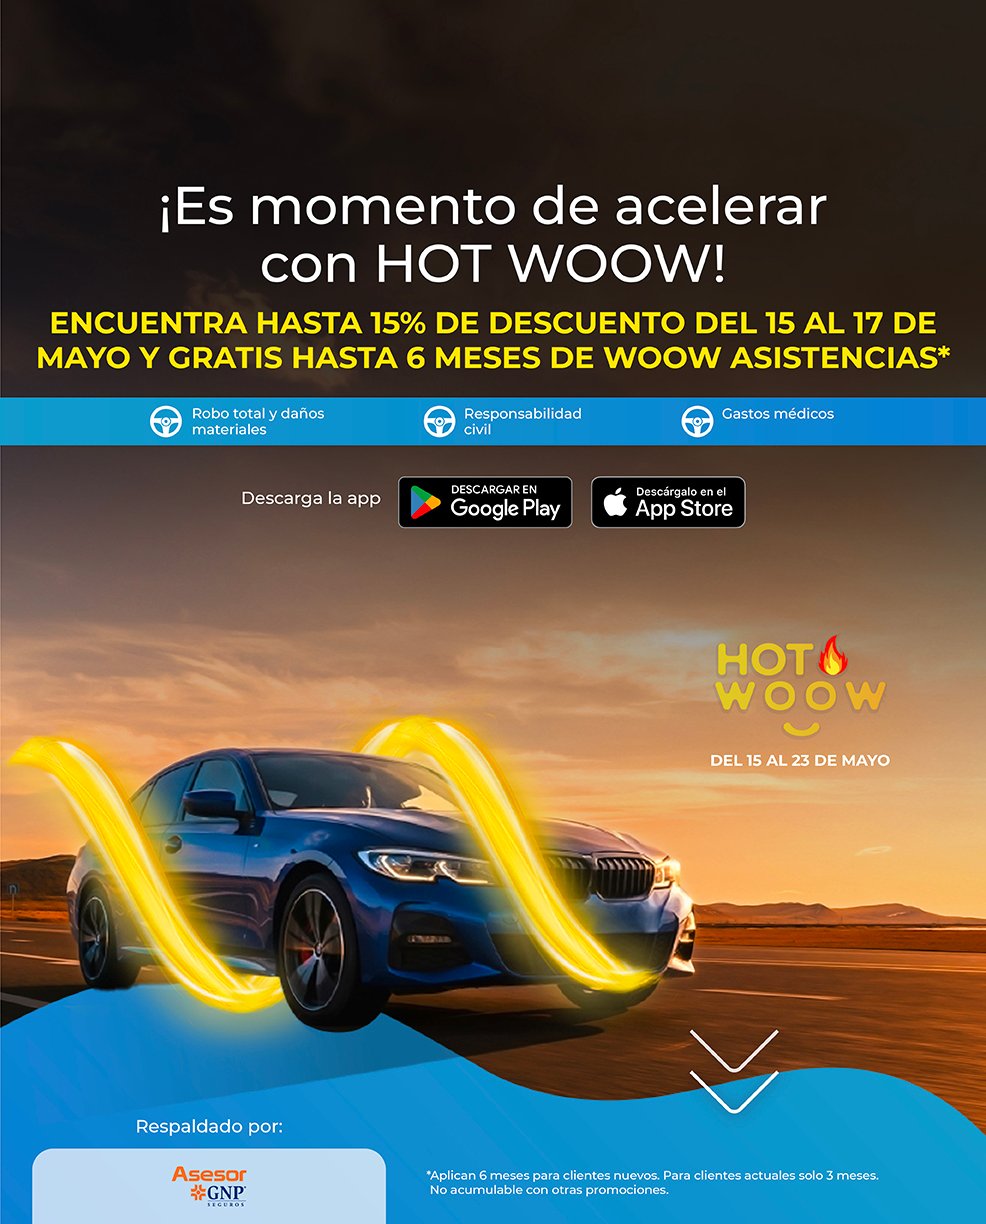 woow-hotwoow_24-hero-mobile-11_auto_gnp-1